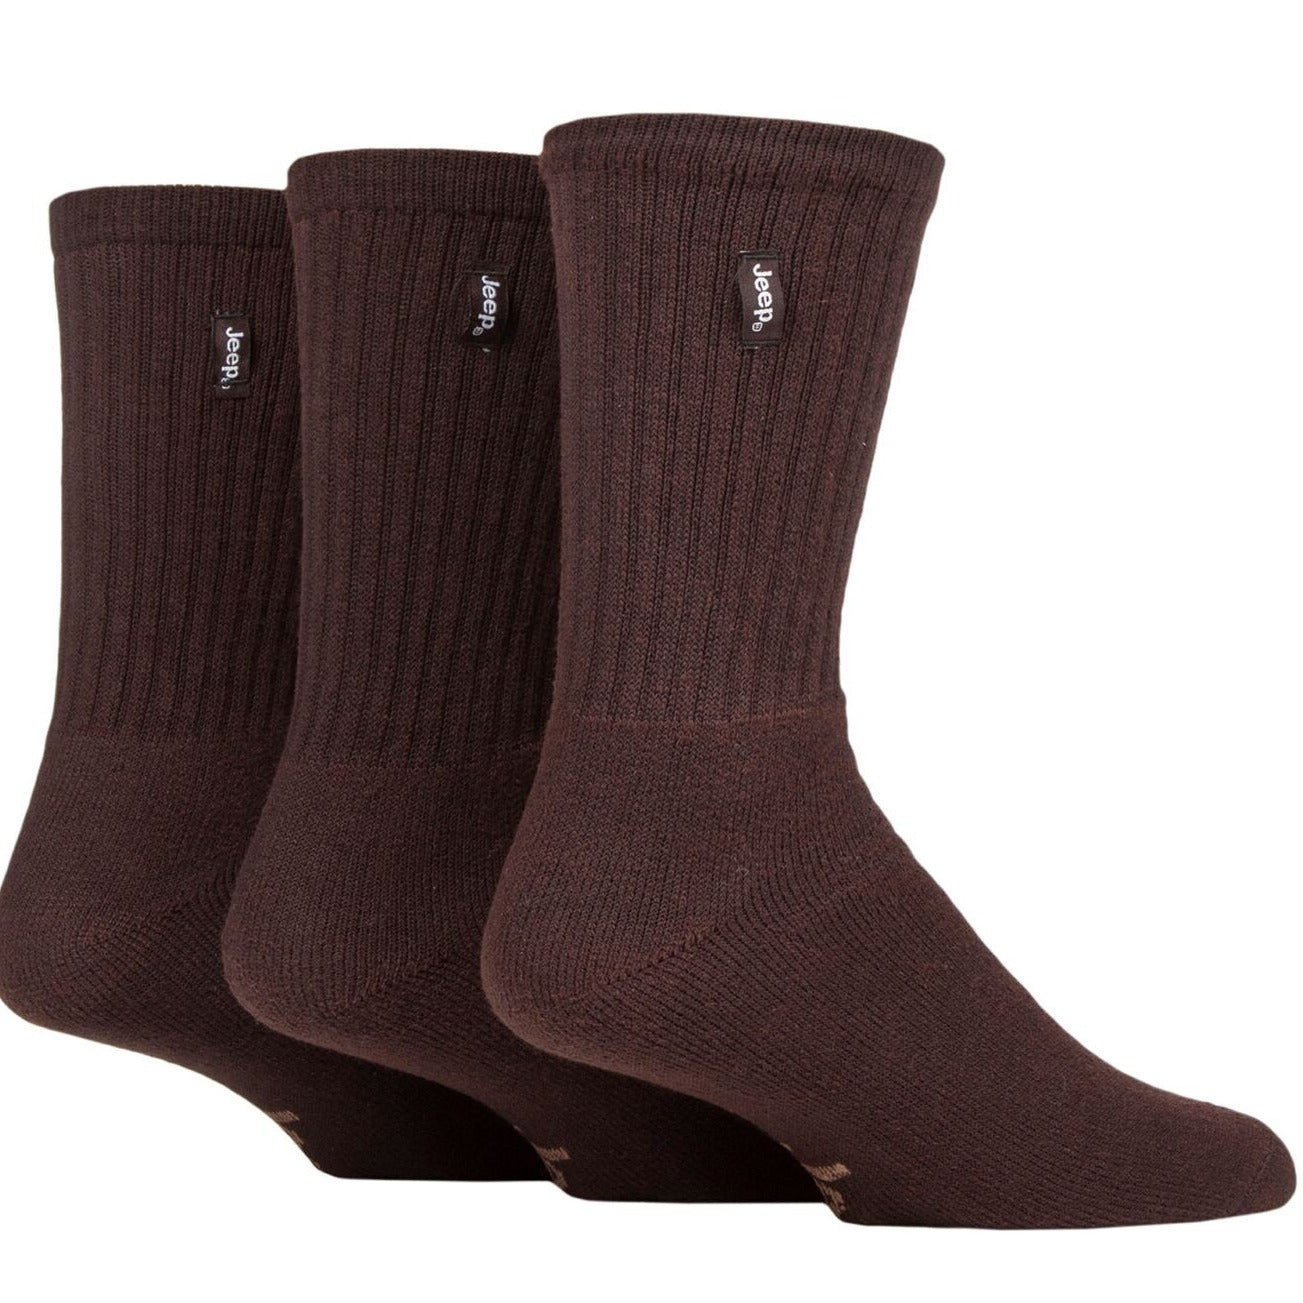 Jeep Mens 3 Pack Vintage Boot Socks – Trunks and Boxers